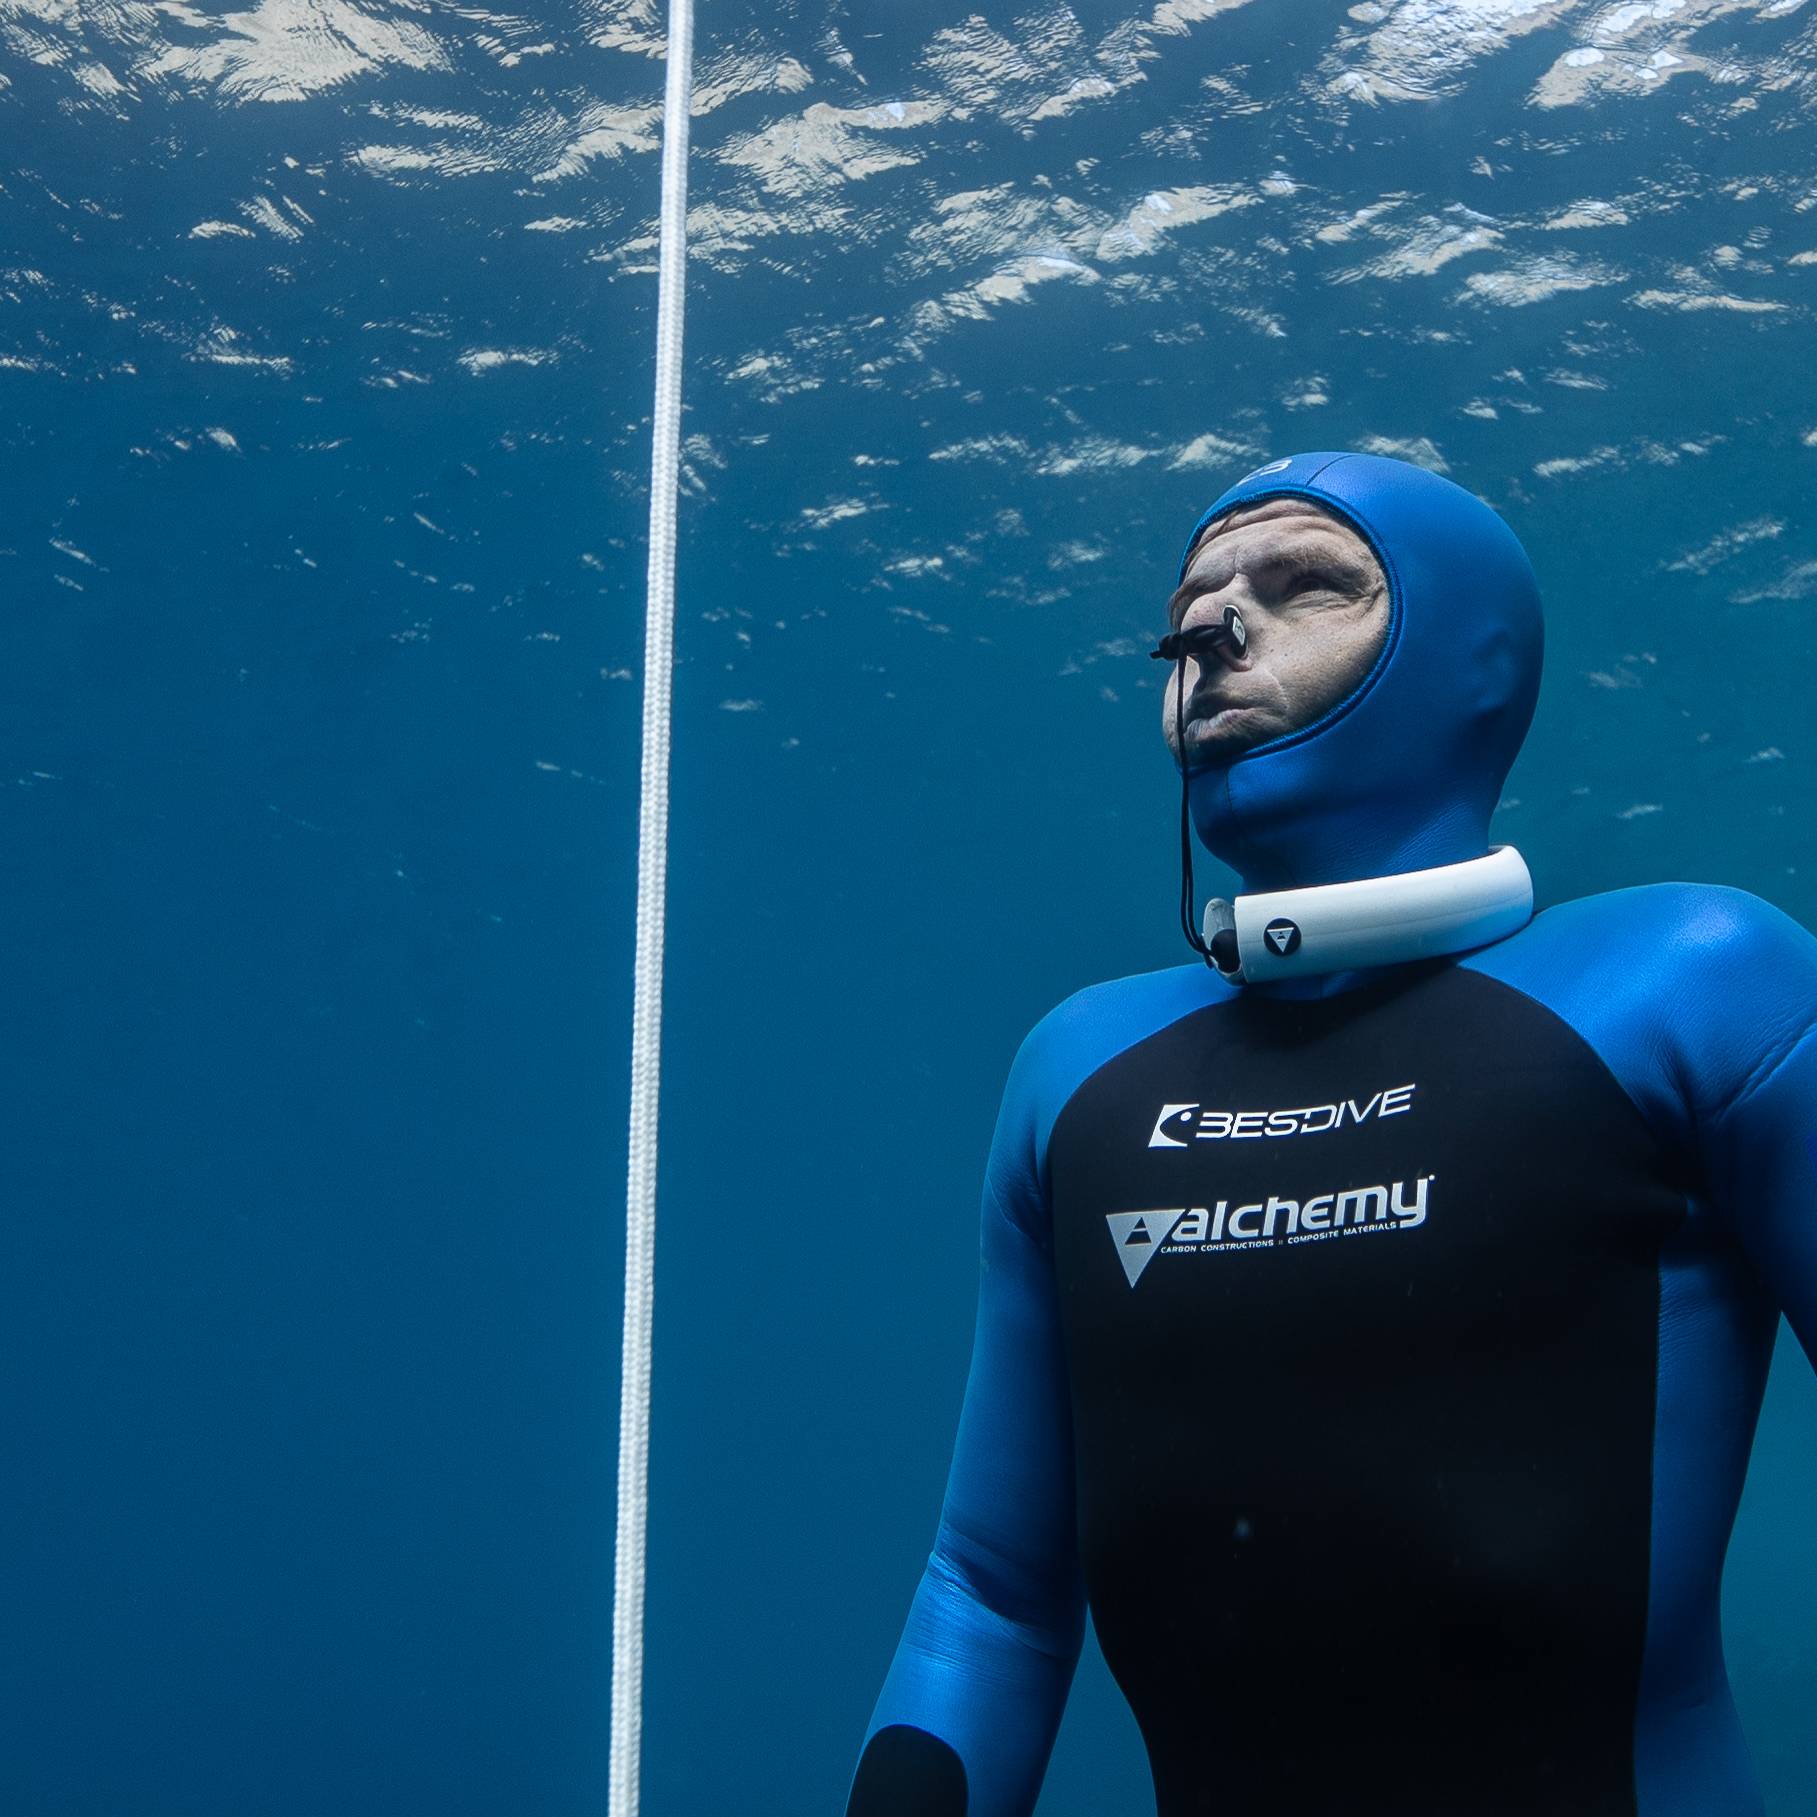 guide to freediving